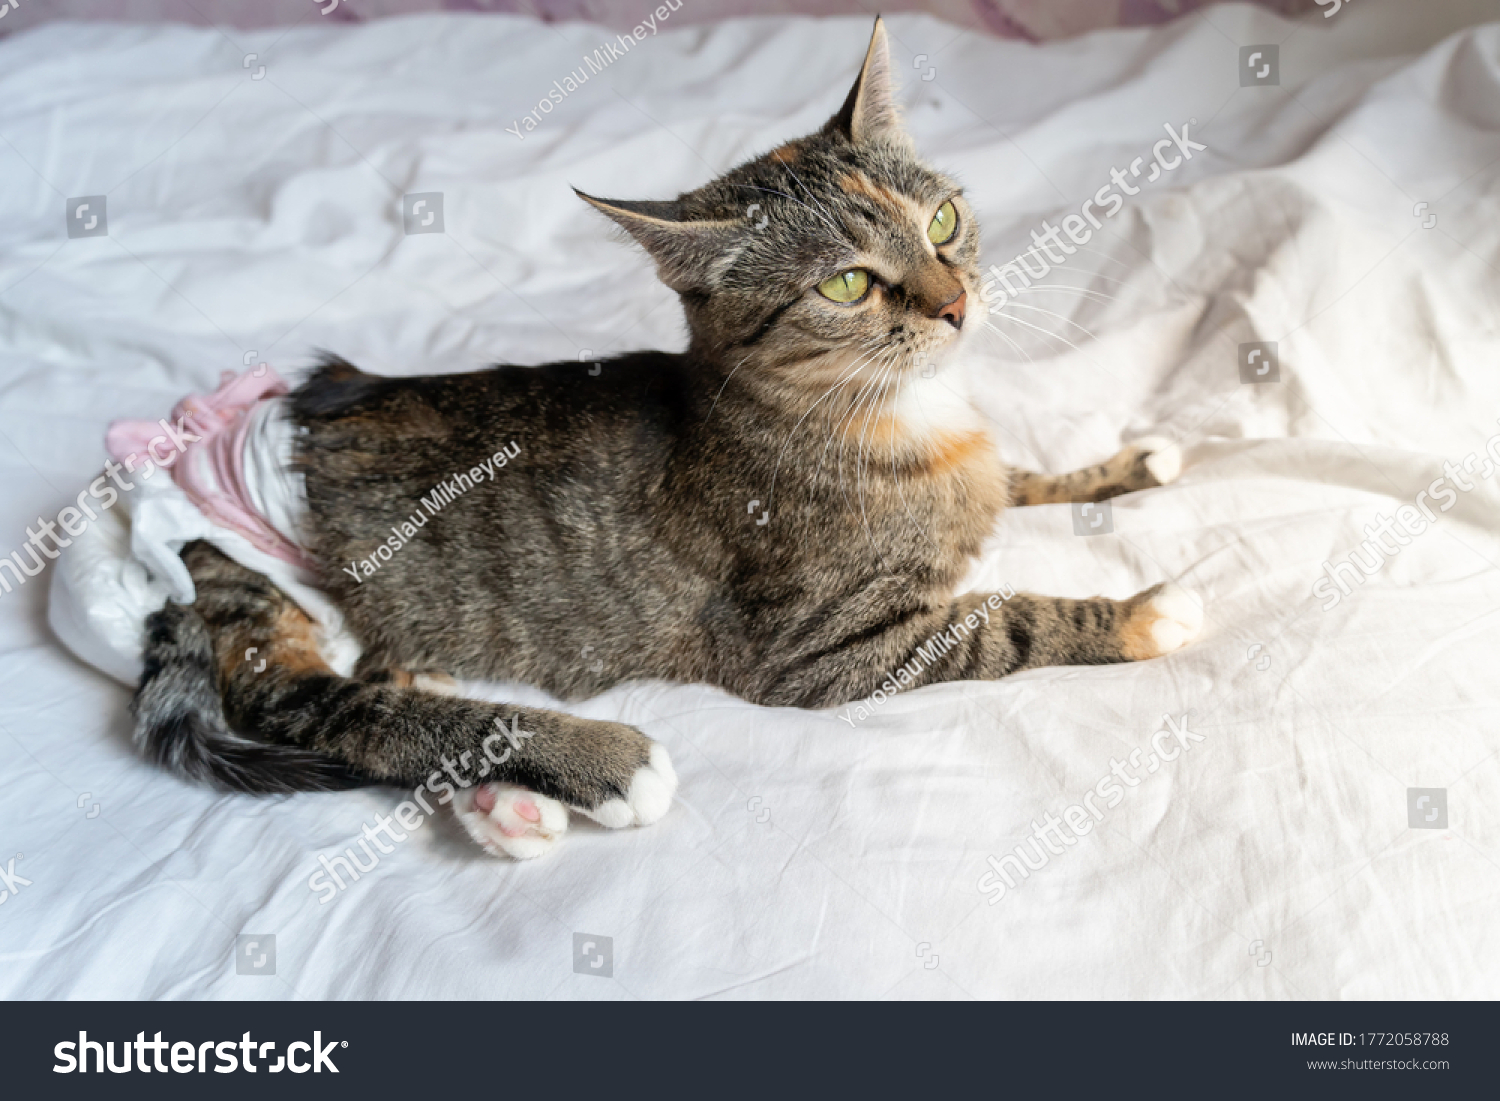 beautiful disabled cat with big green eyes in a disposable diaper is lying on a white sheet on the bed. Cat with paralyzed hind legs. #1772058788